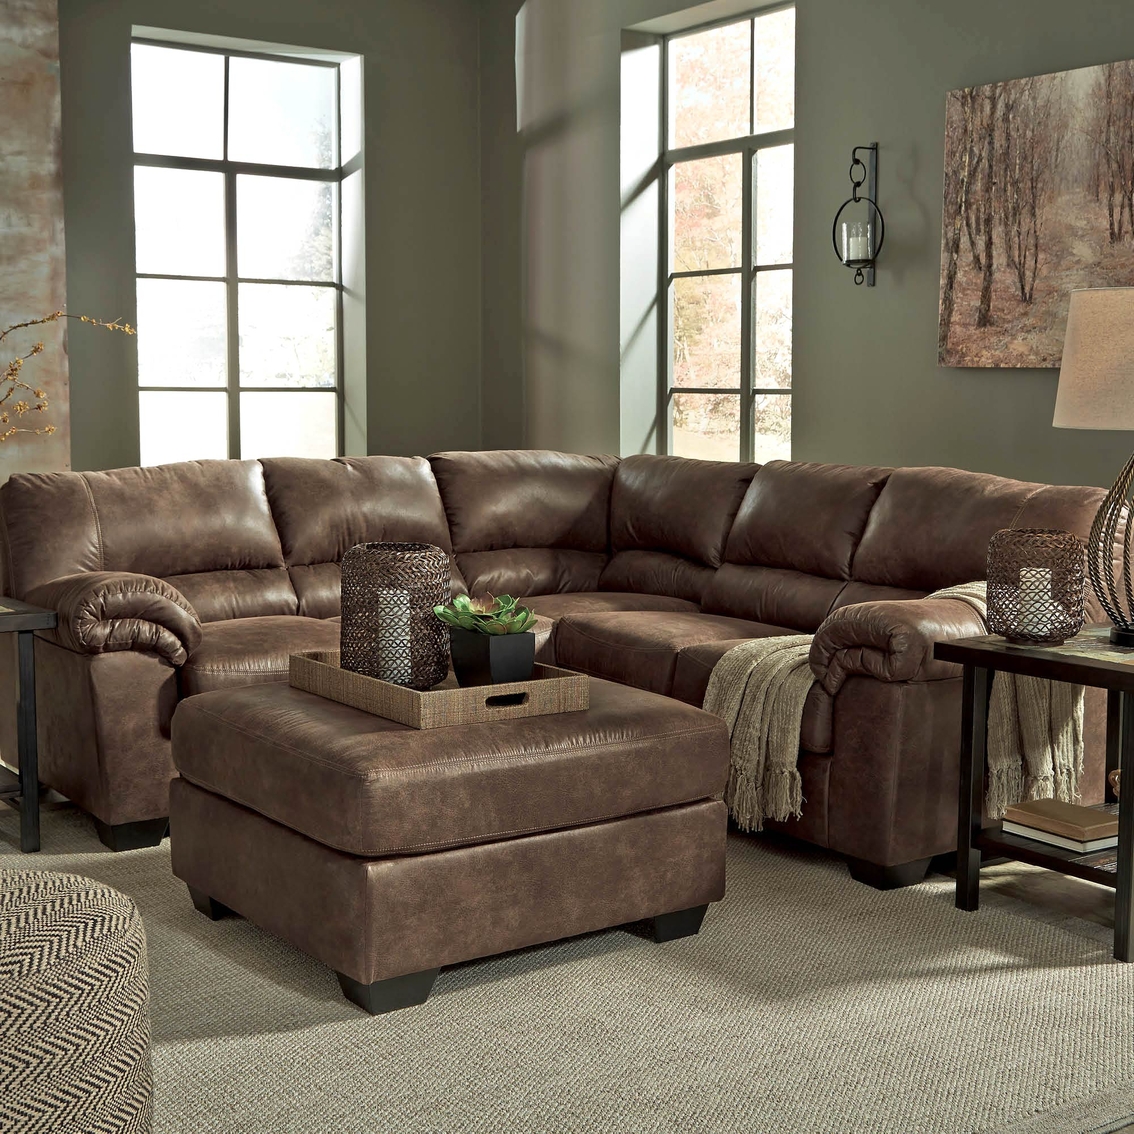 Signature Design by Ashley Bladen 2 Pc. Sectional RAF Loveseat/LAF Sofa - Image 2 of 2